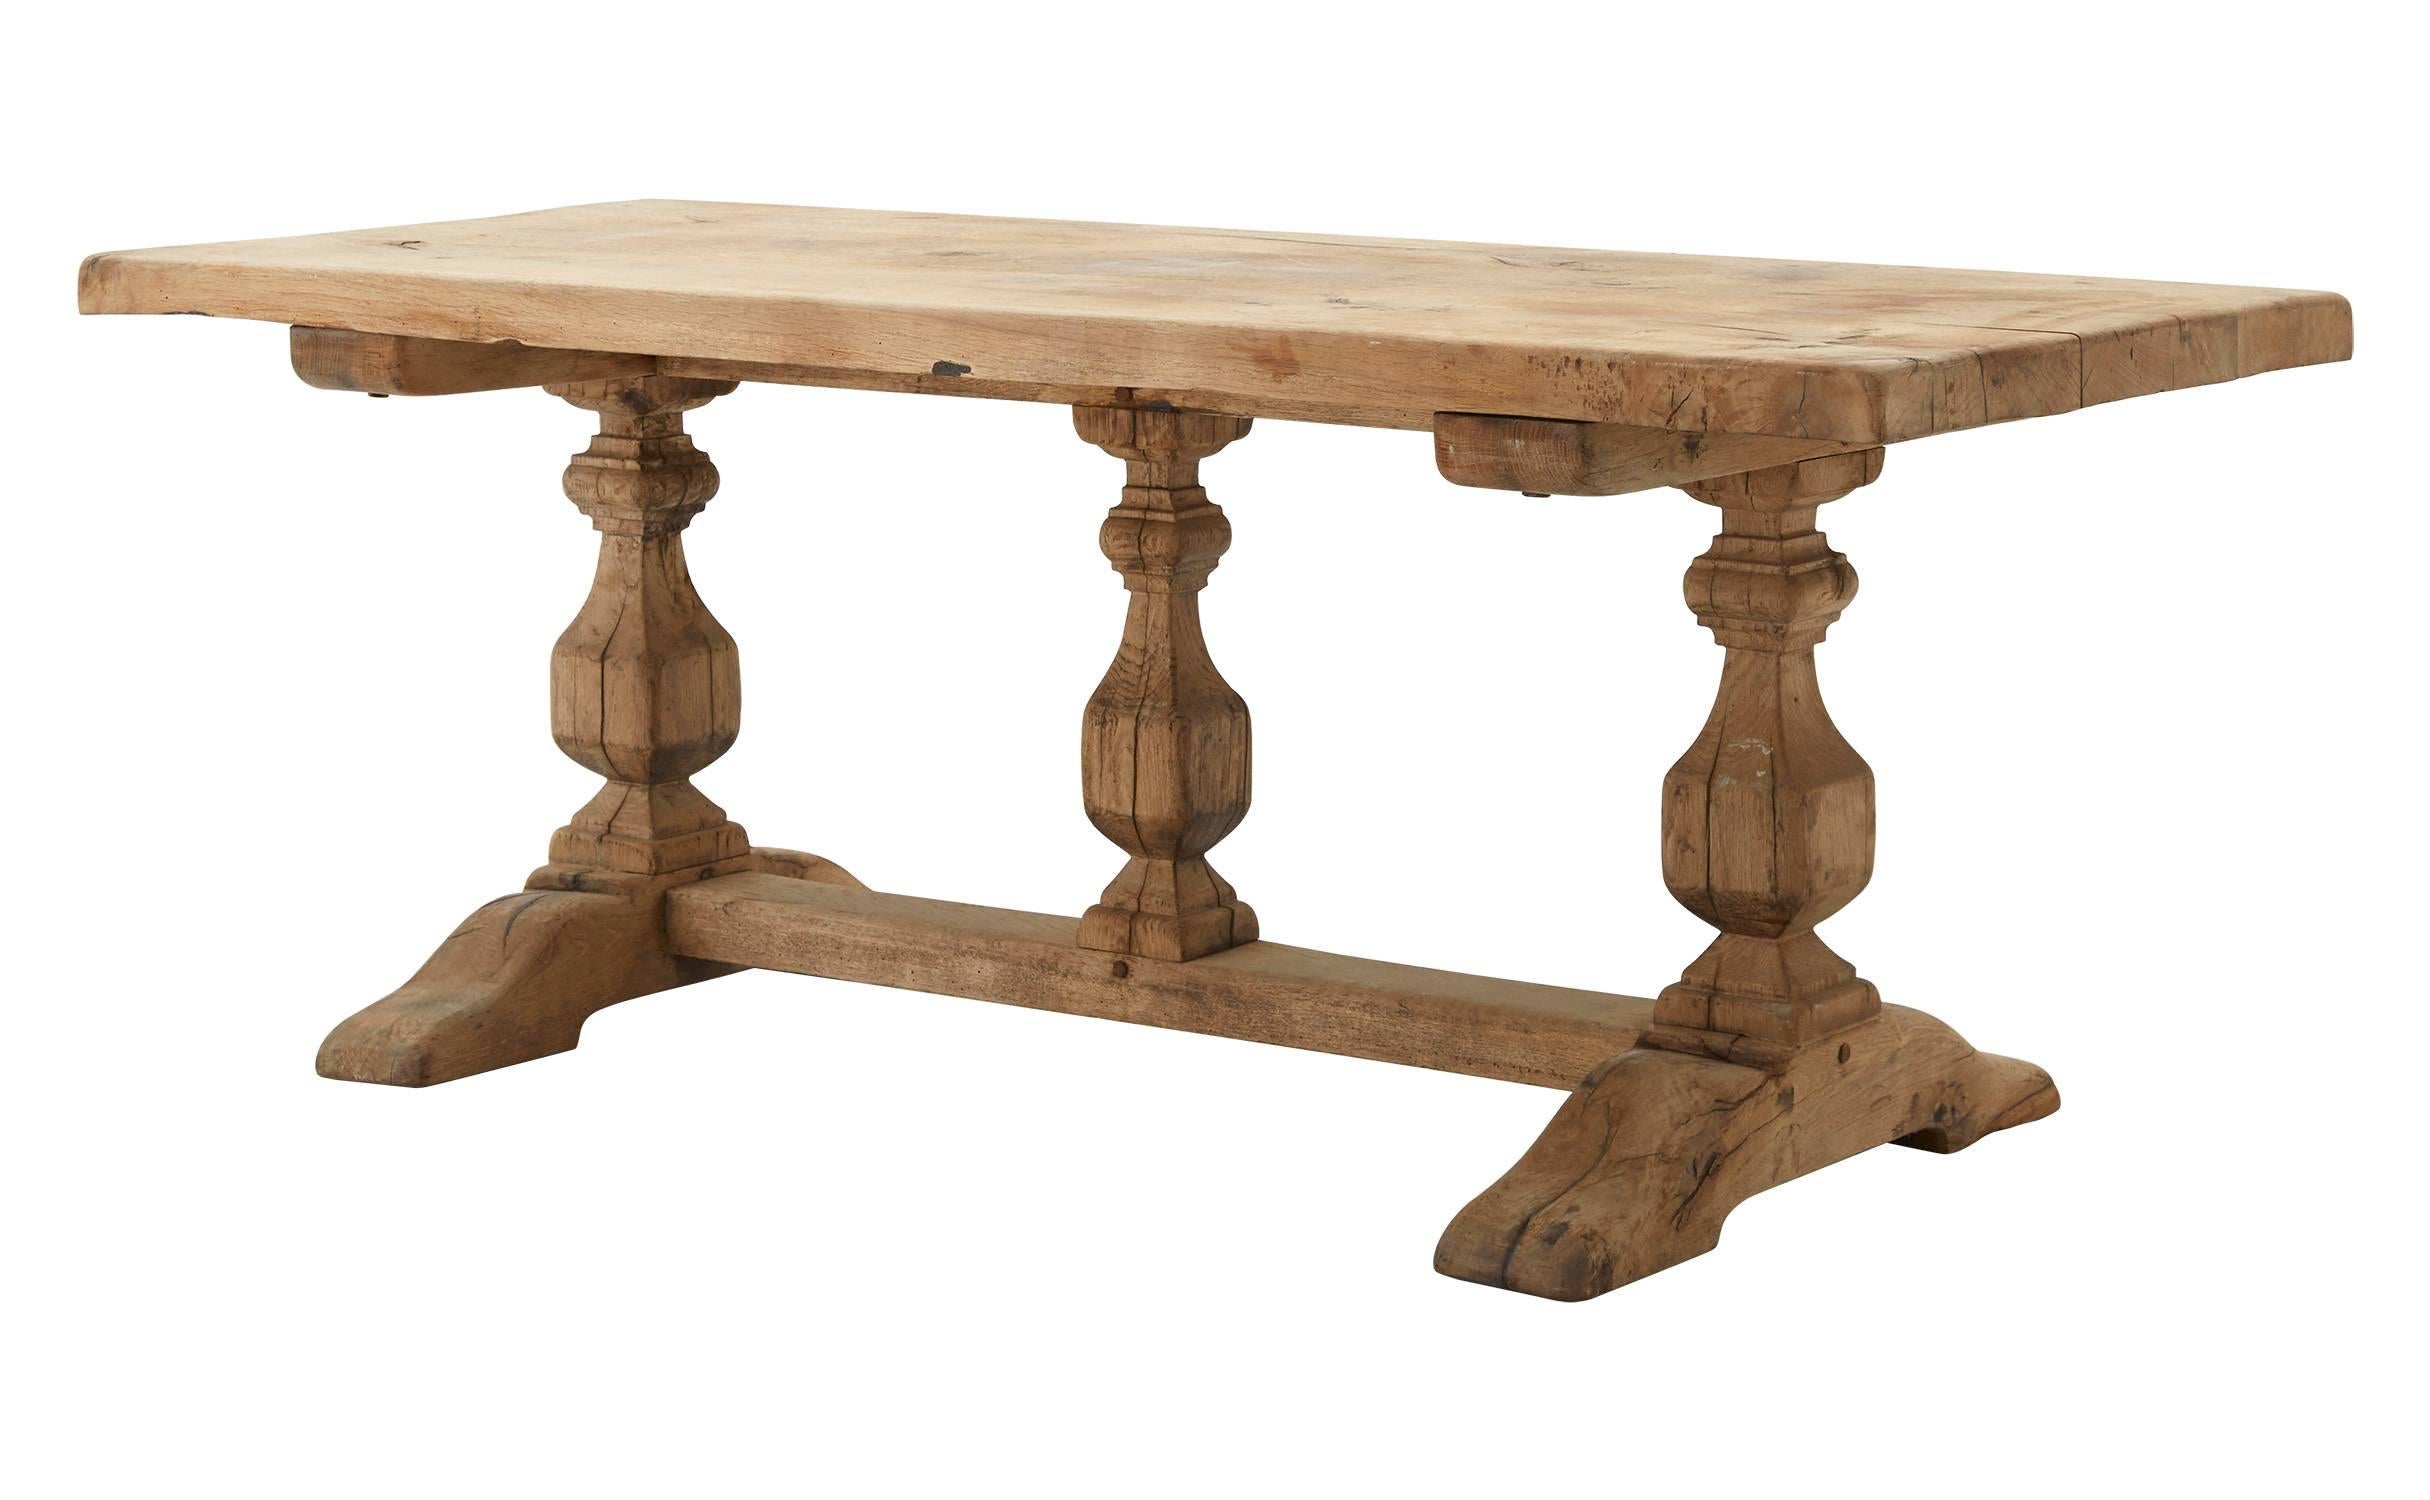 French Provincial 19th Century French Pyrenees Dining Table